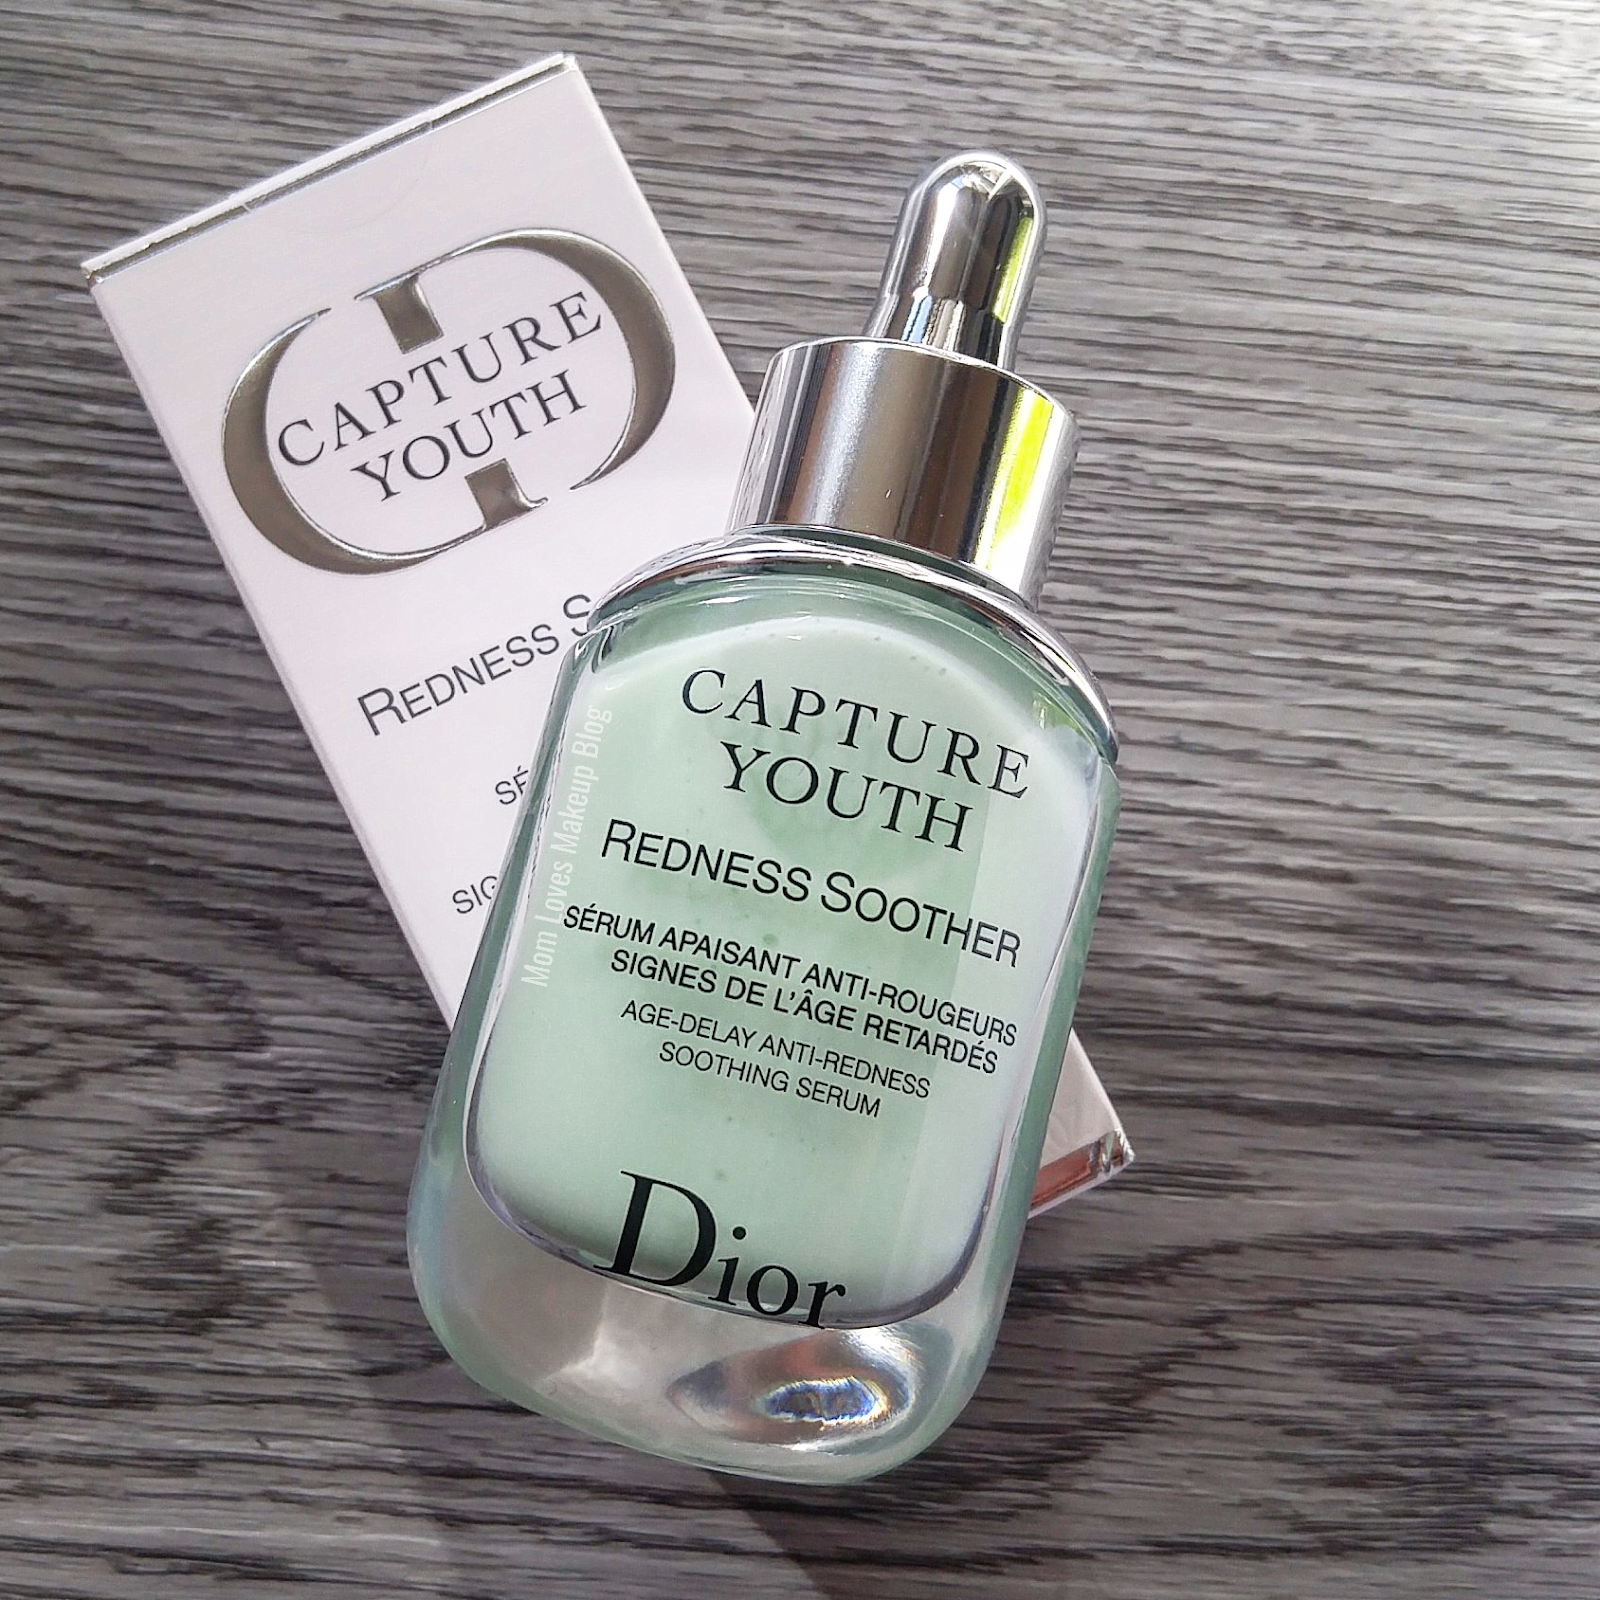 dior capture youth redness soother serum